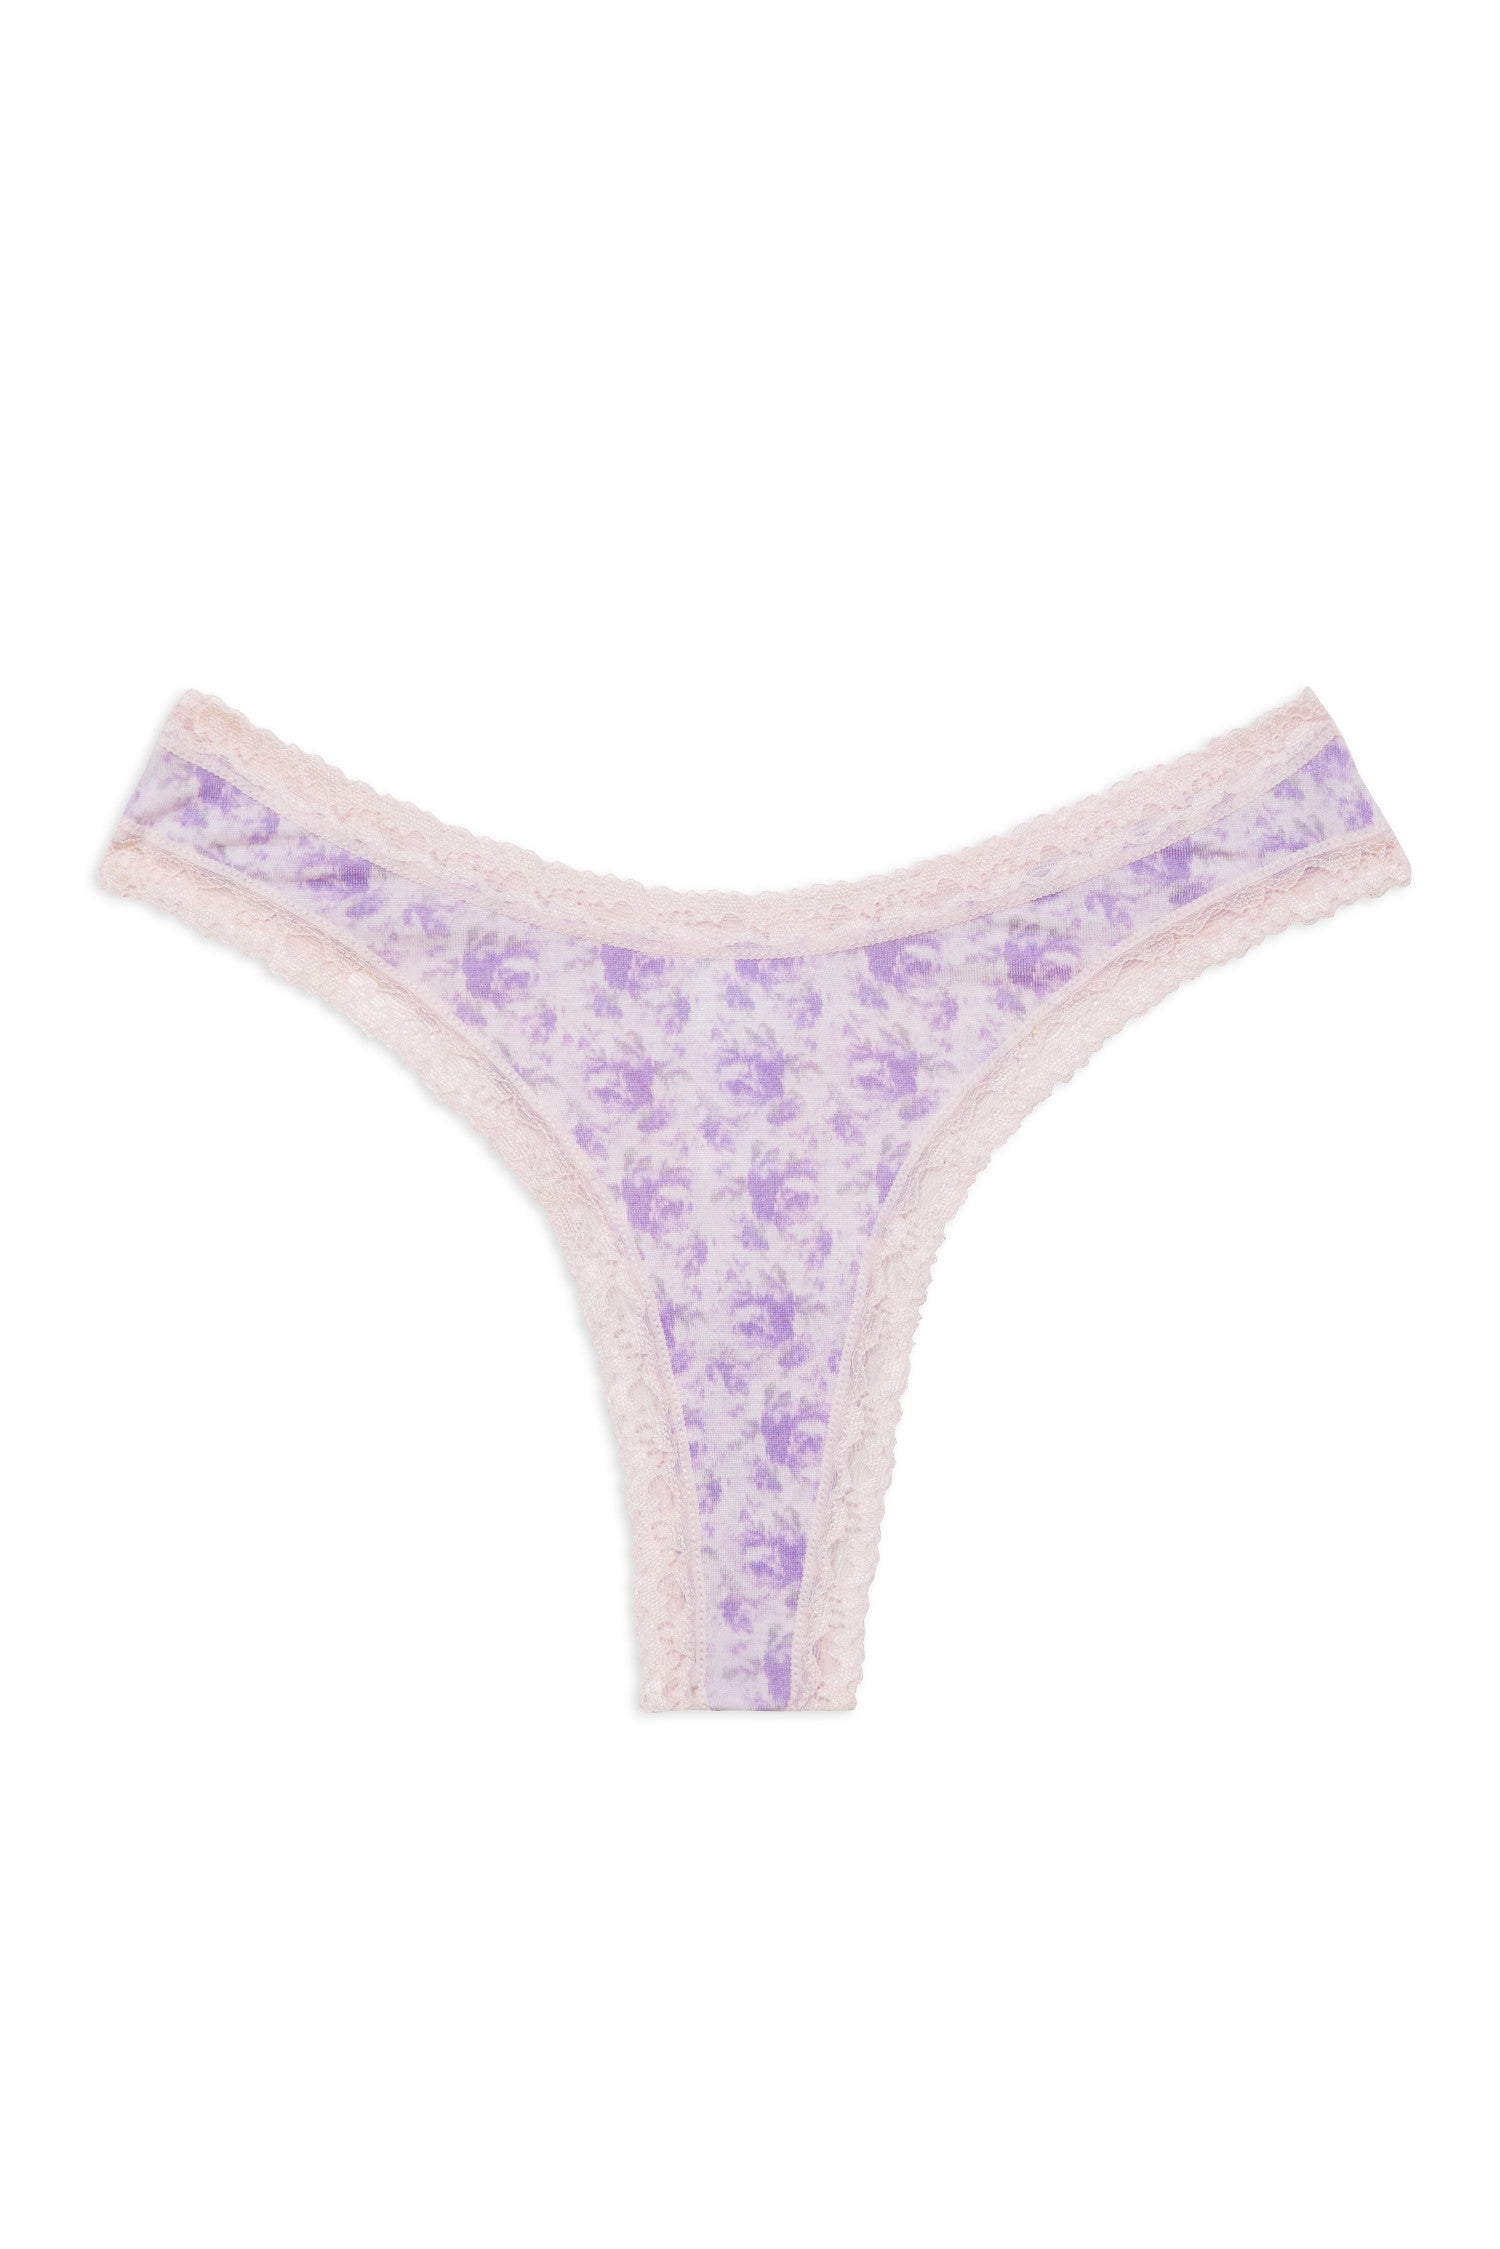 Vibrant floral print thong set in soft cotton with lace trim